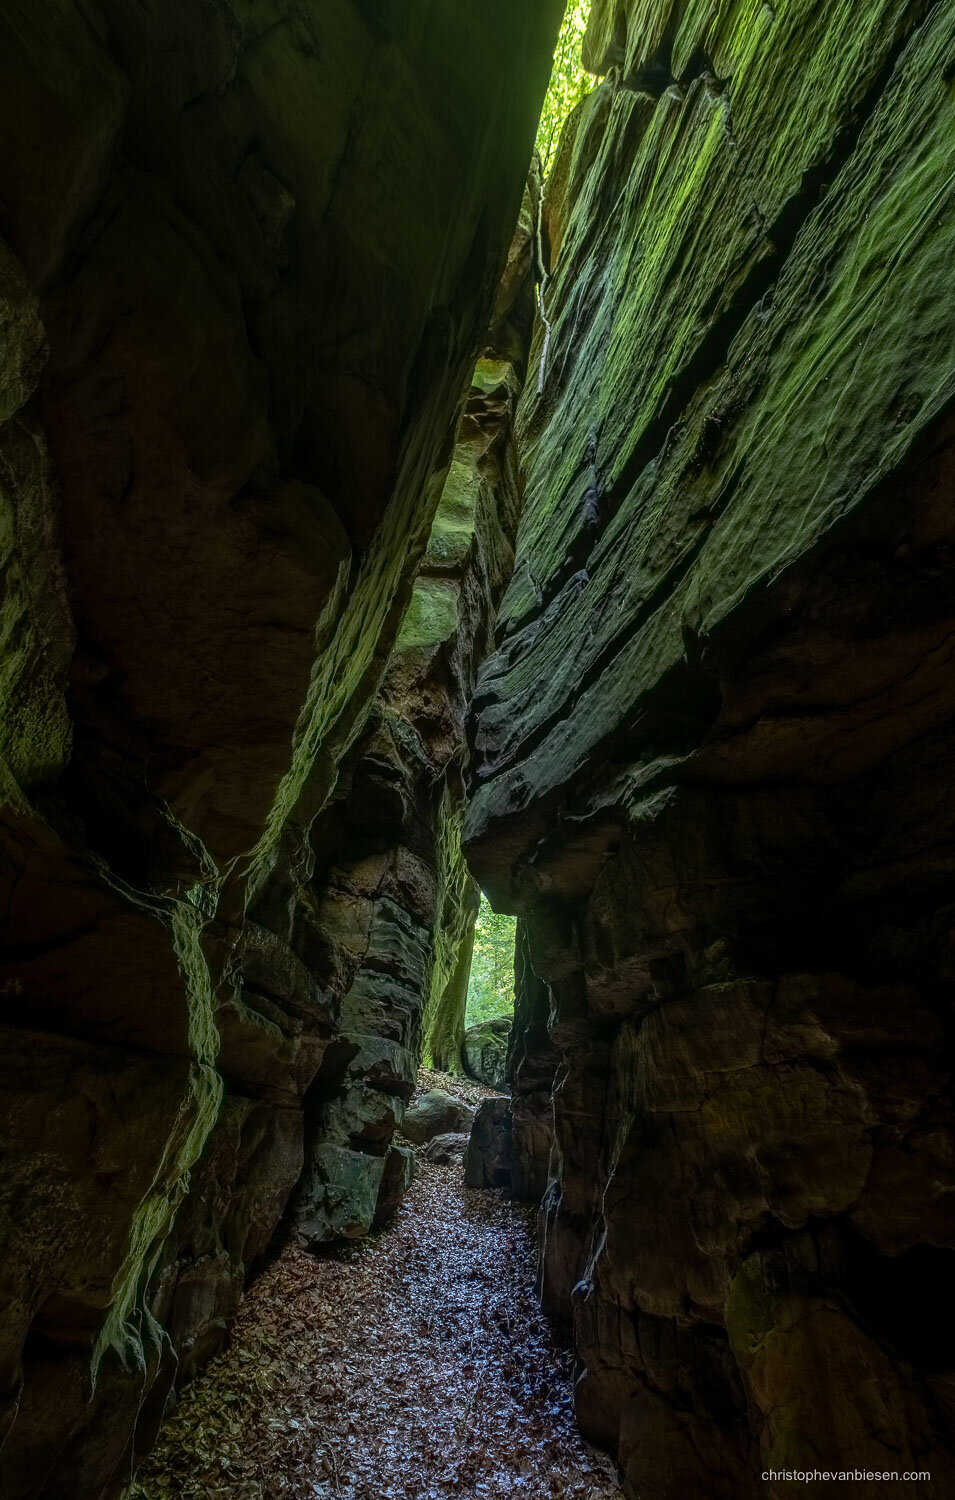 Inside the narrow caves of the Mullerthal.